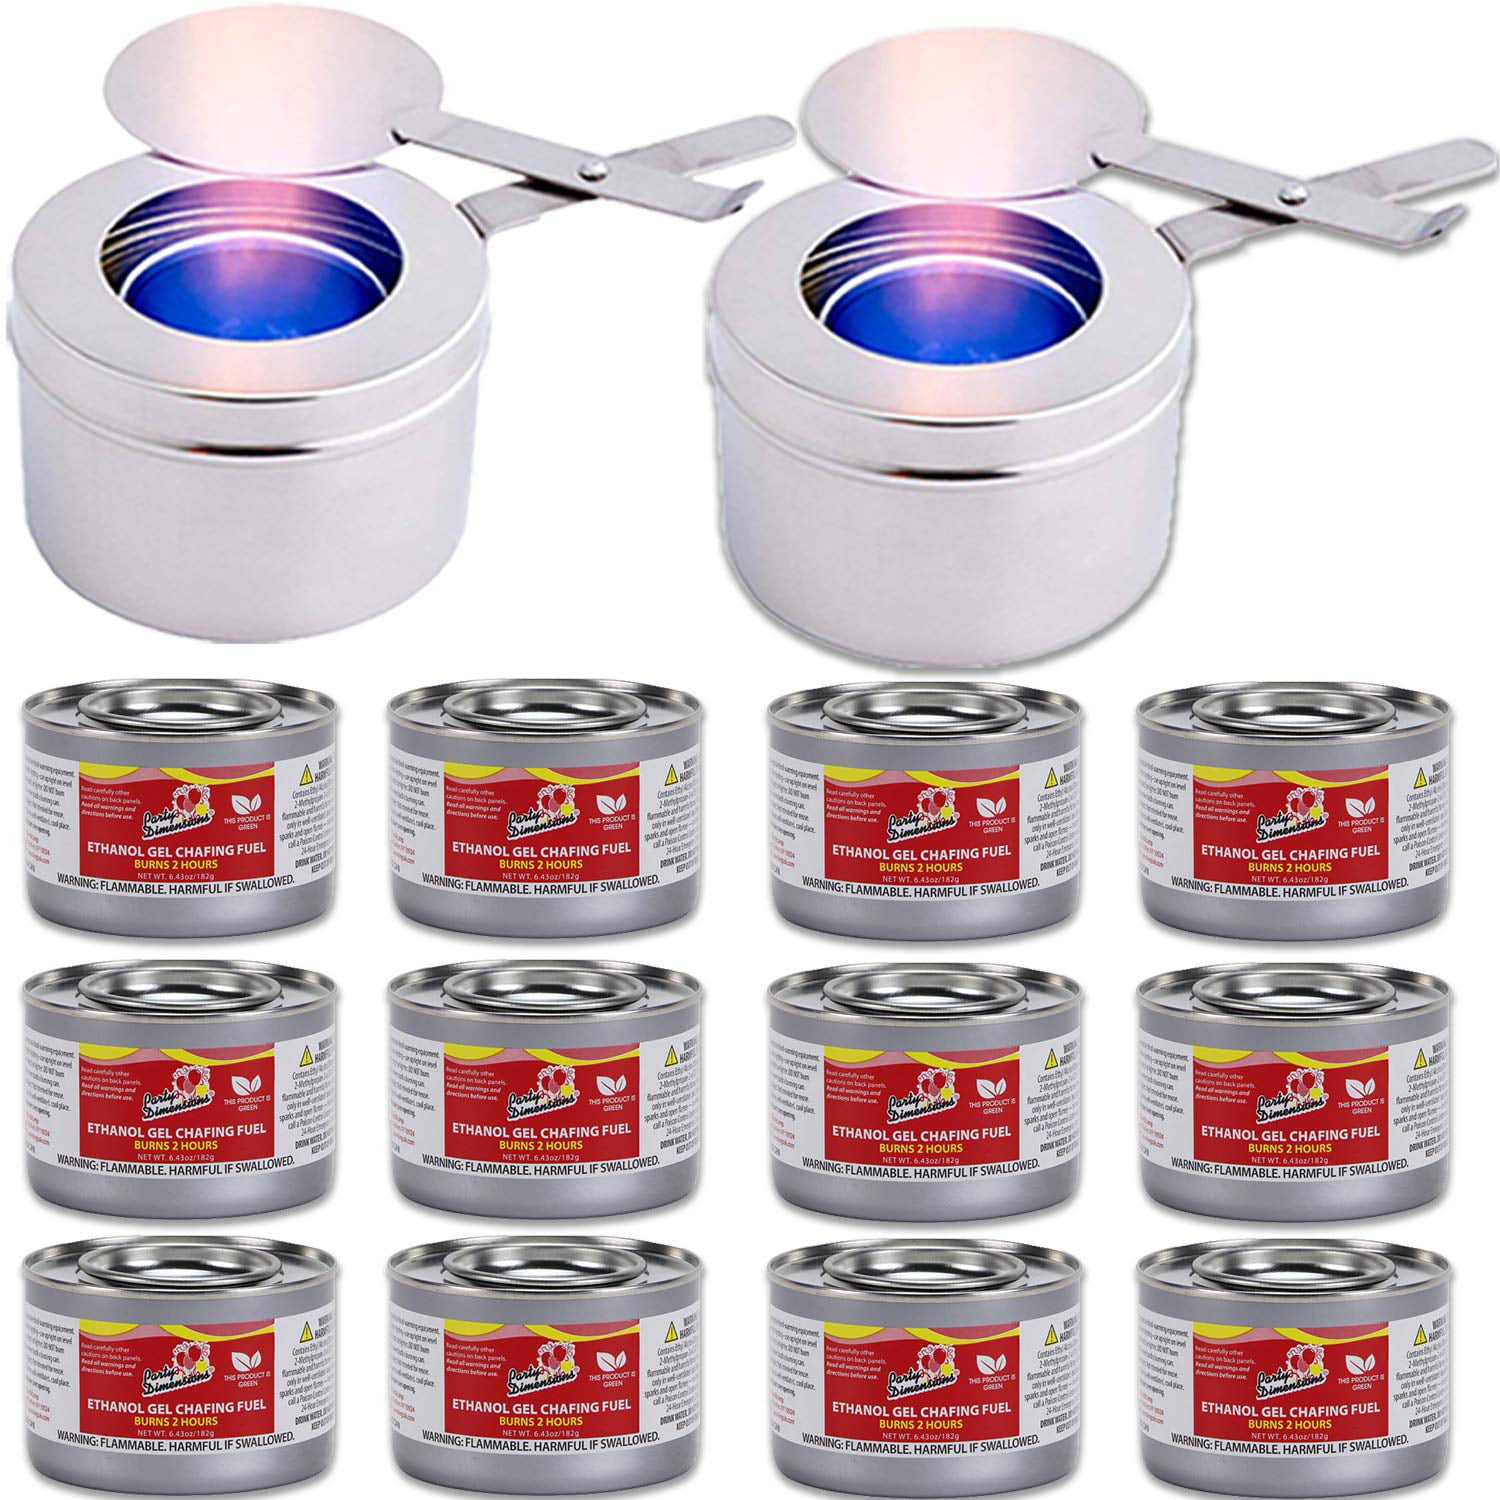 CATERERS CHAFING TINS 12 CHAFING DISH FUEL GEL CANS 2.5 HOUR BURN TIME EACH 